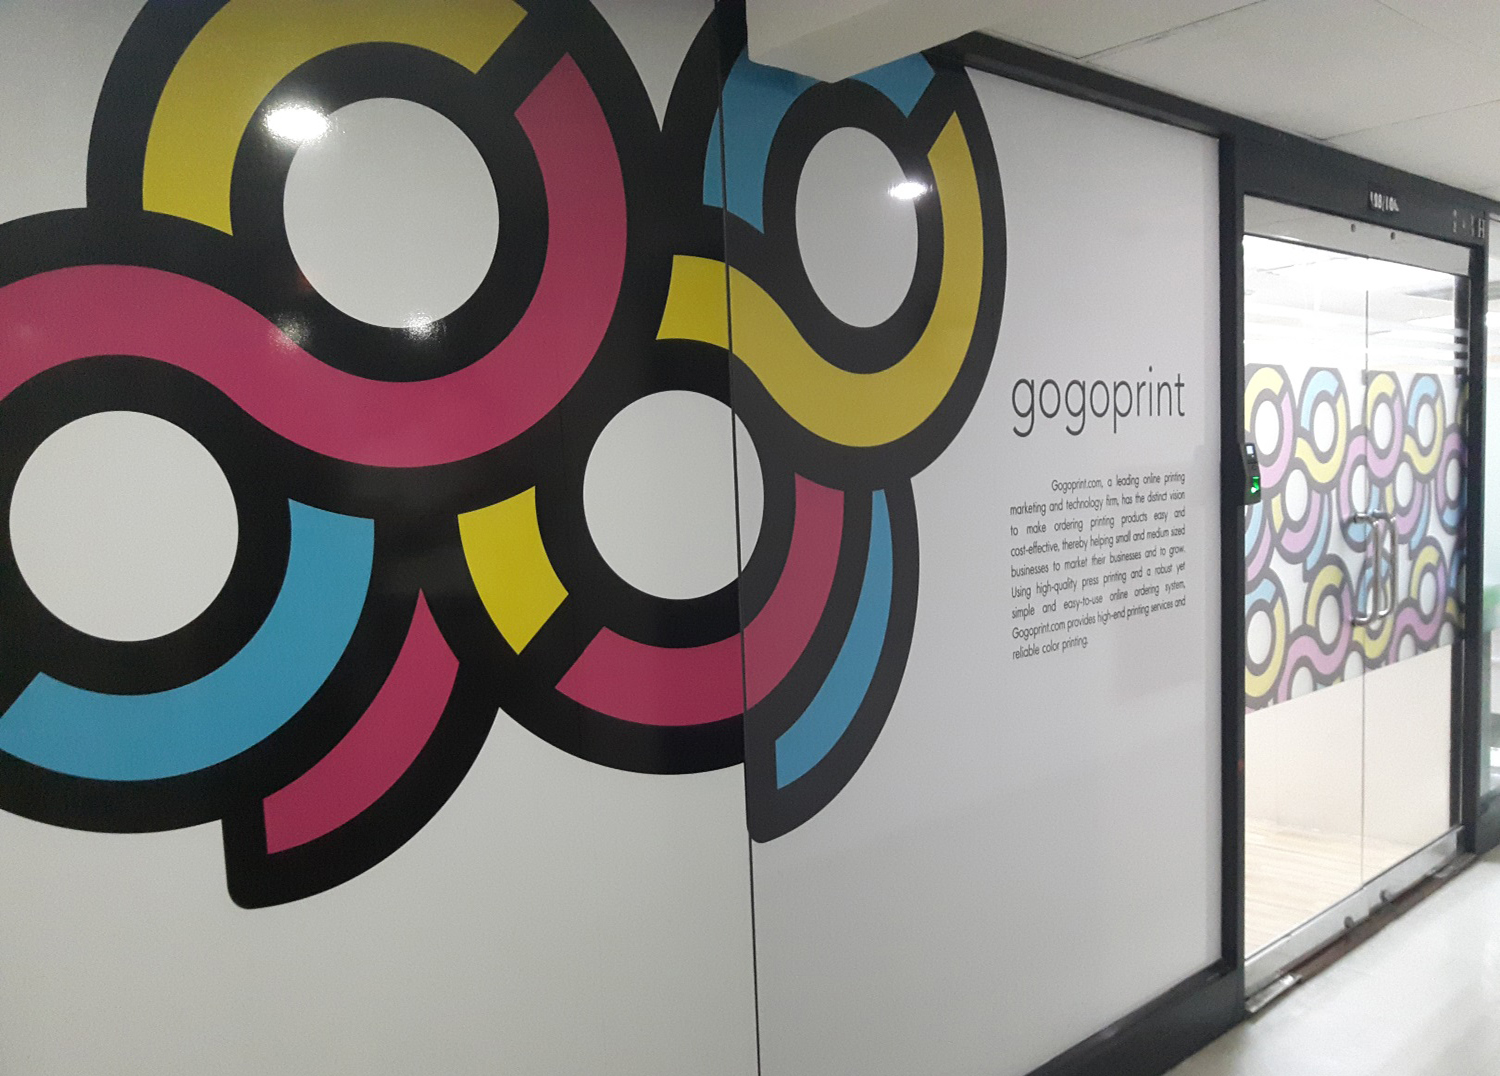 Online printing startup Gogoprint launches in Singapore